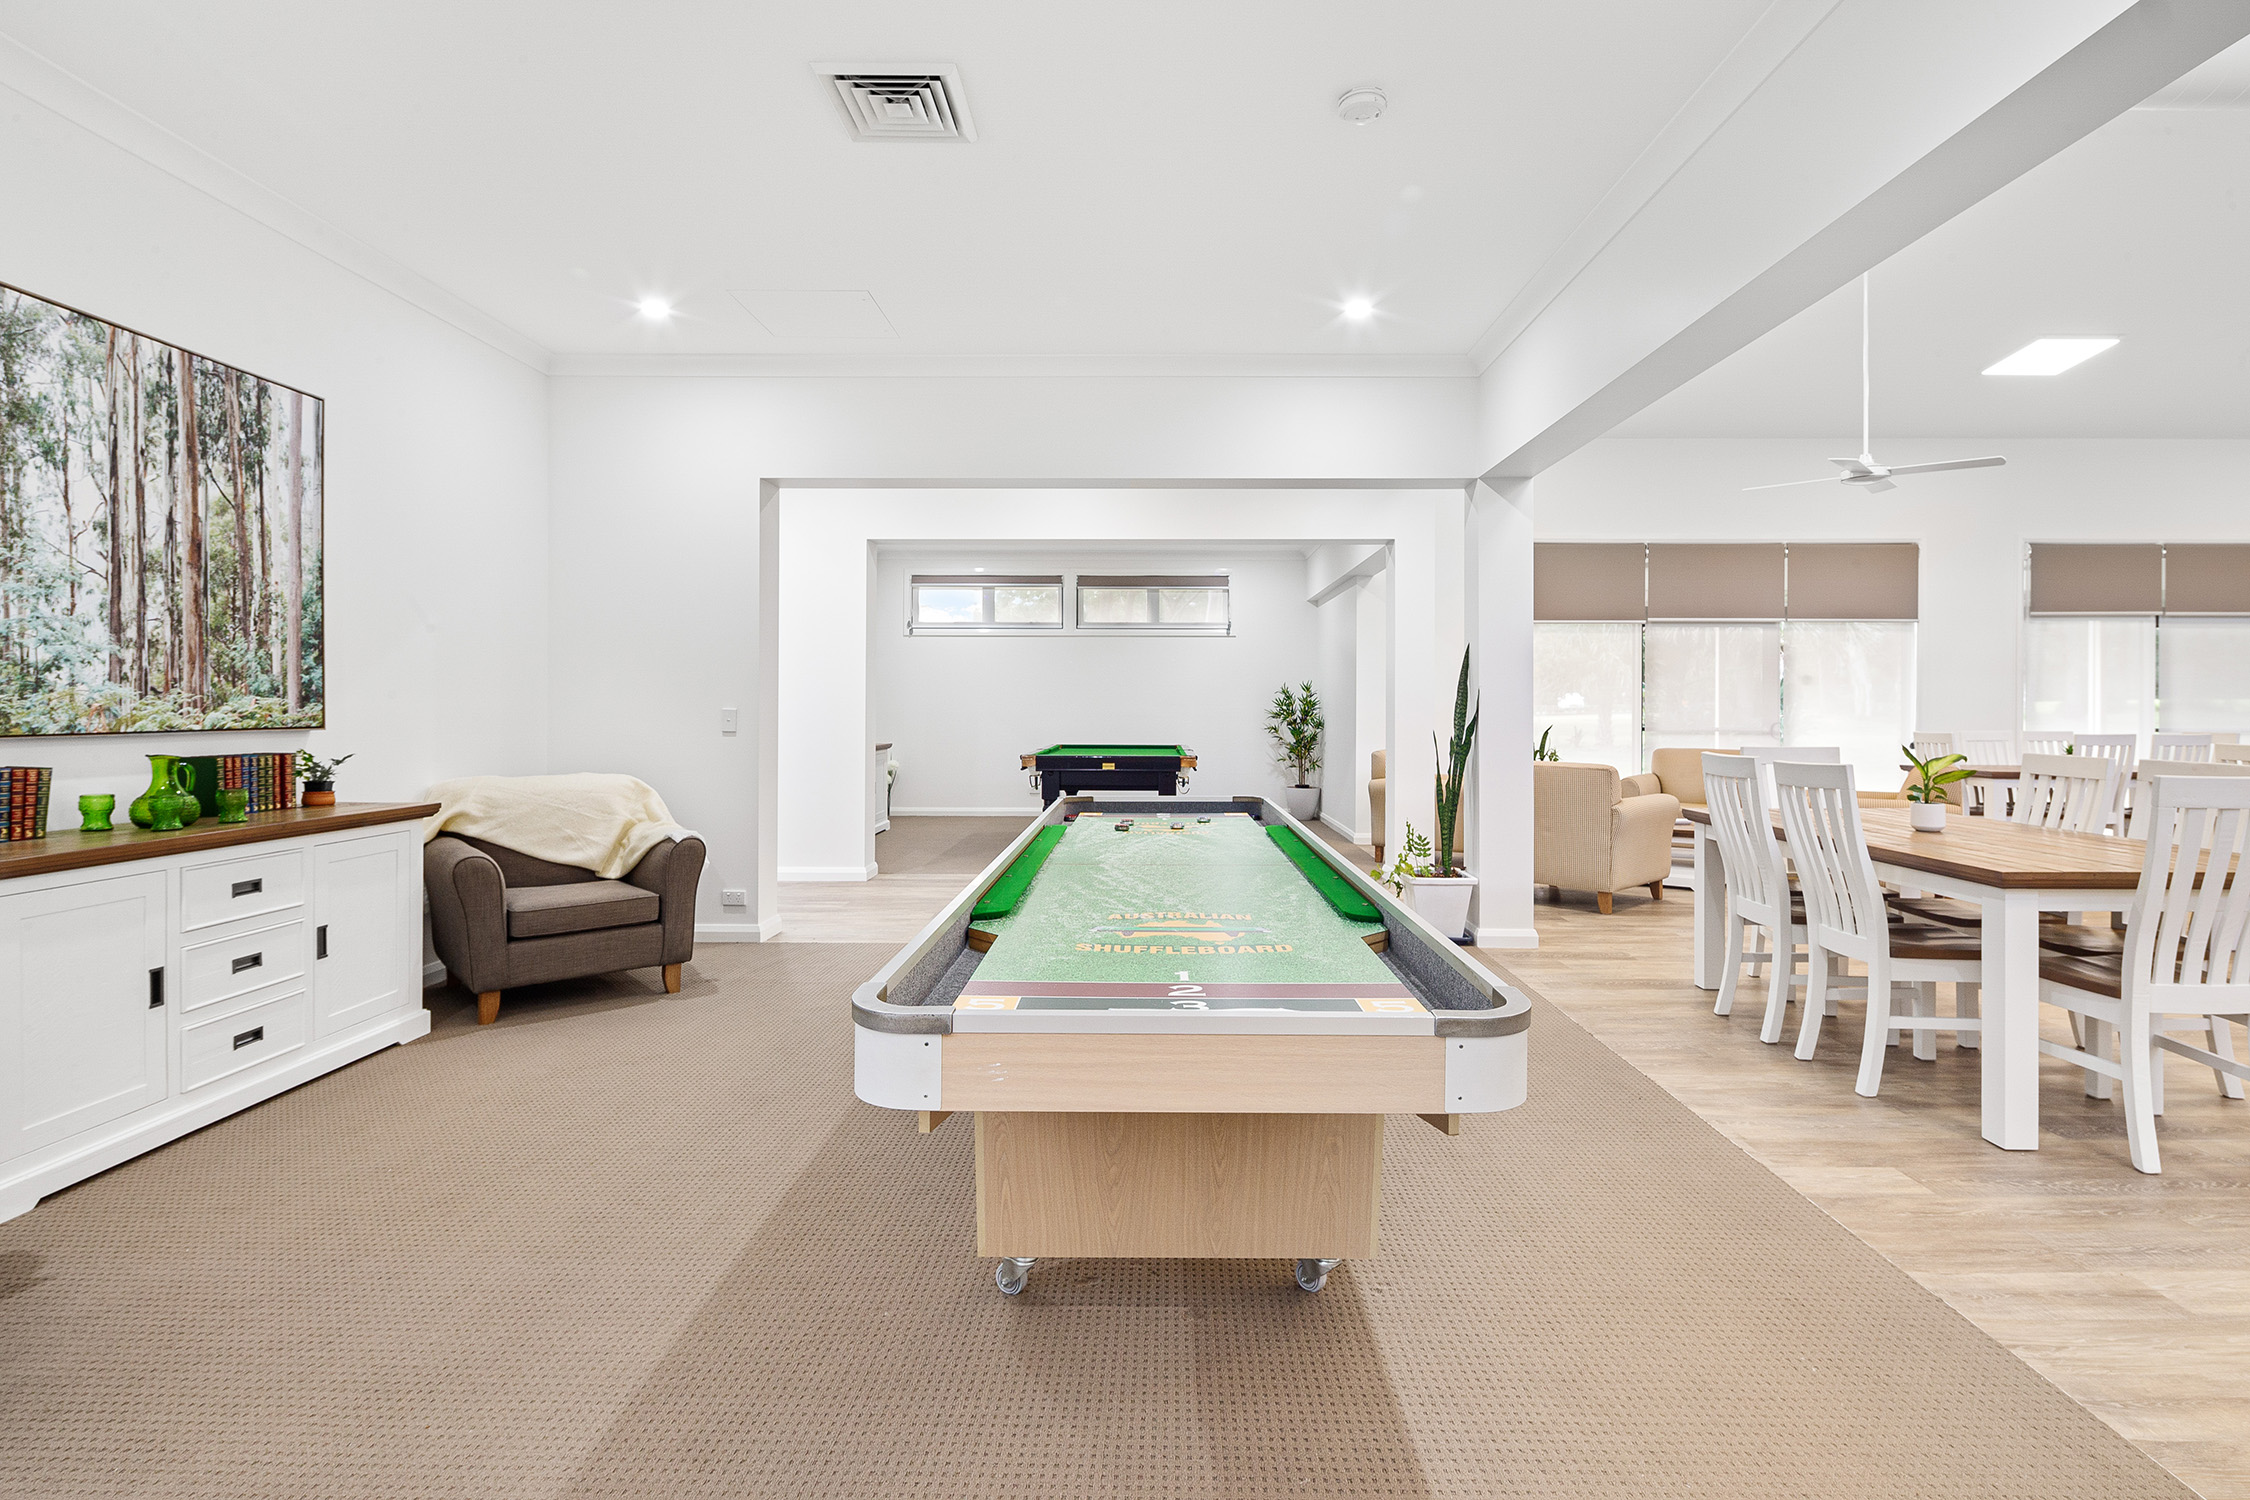 Toukley_Long-Khanh-Lakefront-Village_MultifuntionalRoom_192 | RSL LifeCare - provide care and service to war veterans, retirement villages and accommodation, aged care services and assisted living